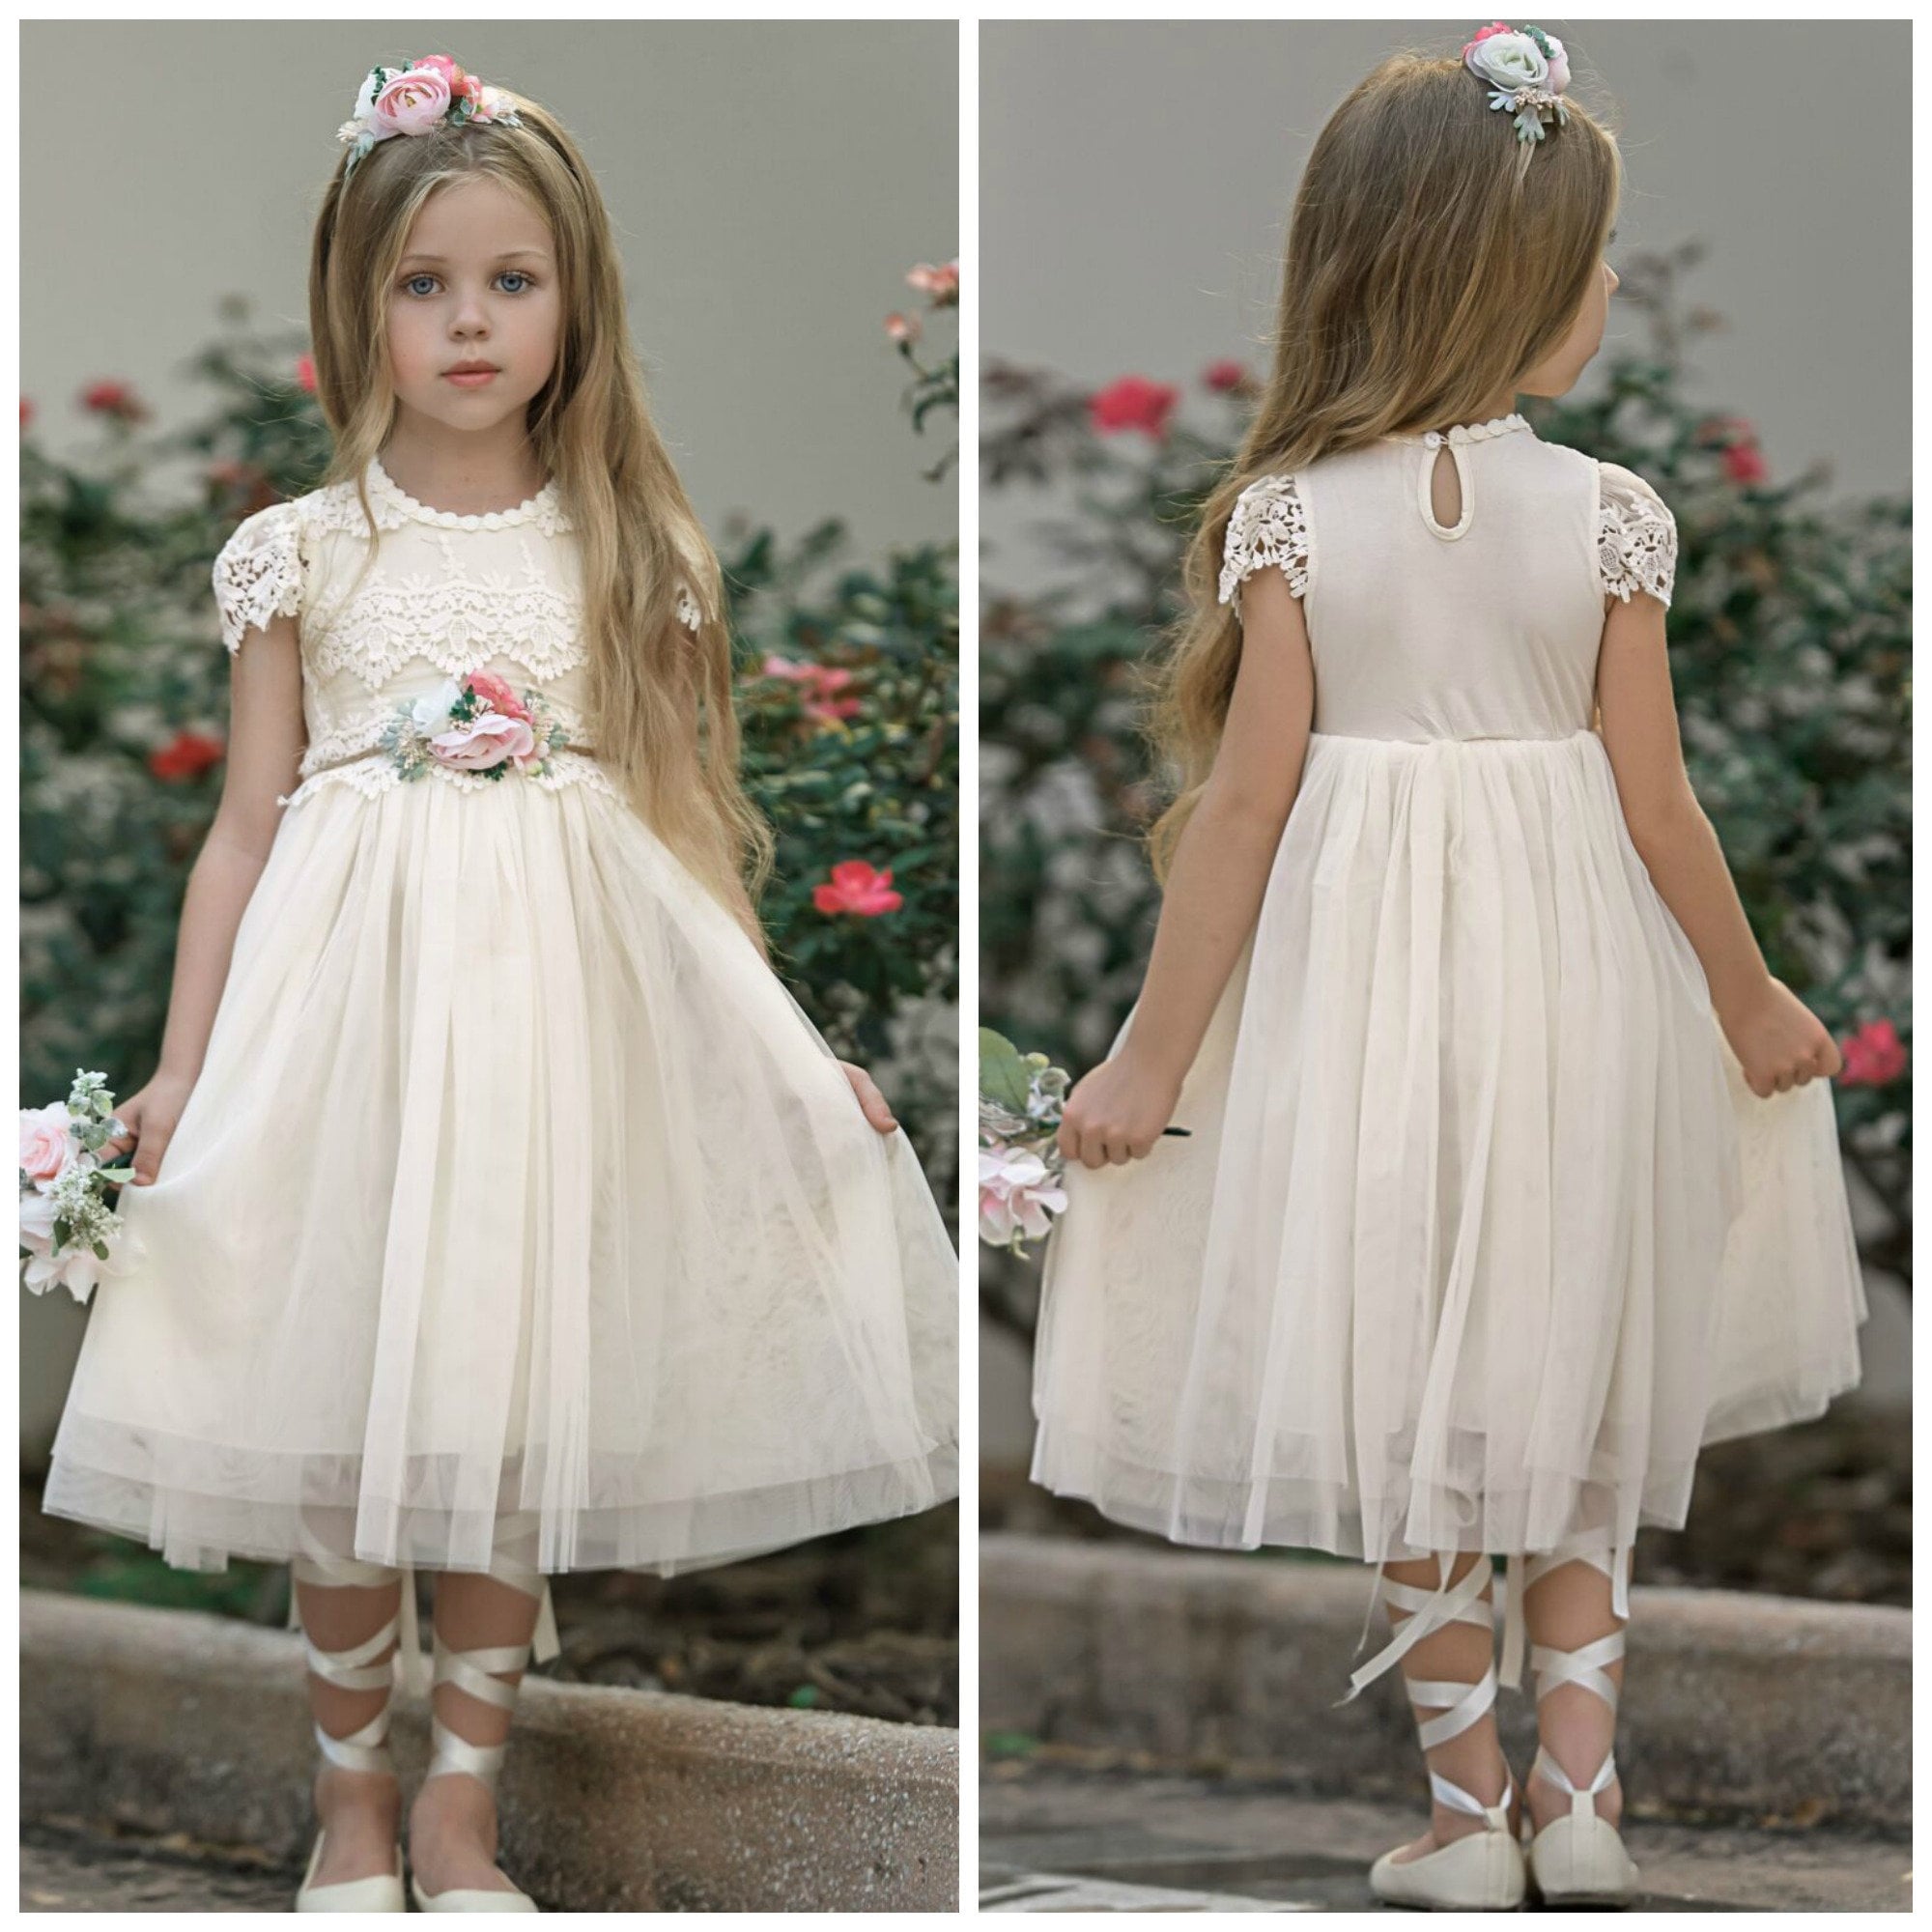 Georgia Pink Flower Girl Dress and Bolero Outfit Birthday Party Gown & FREE Headband